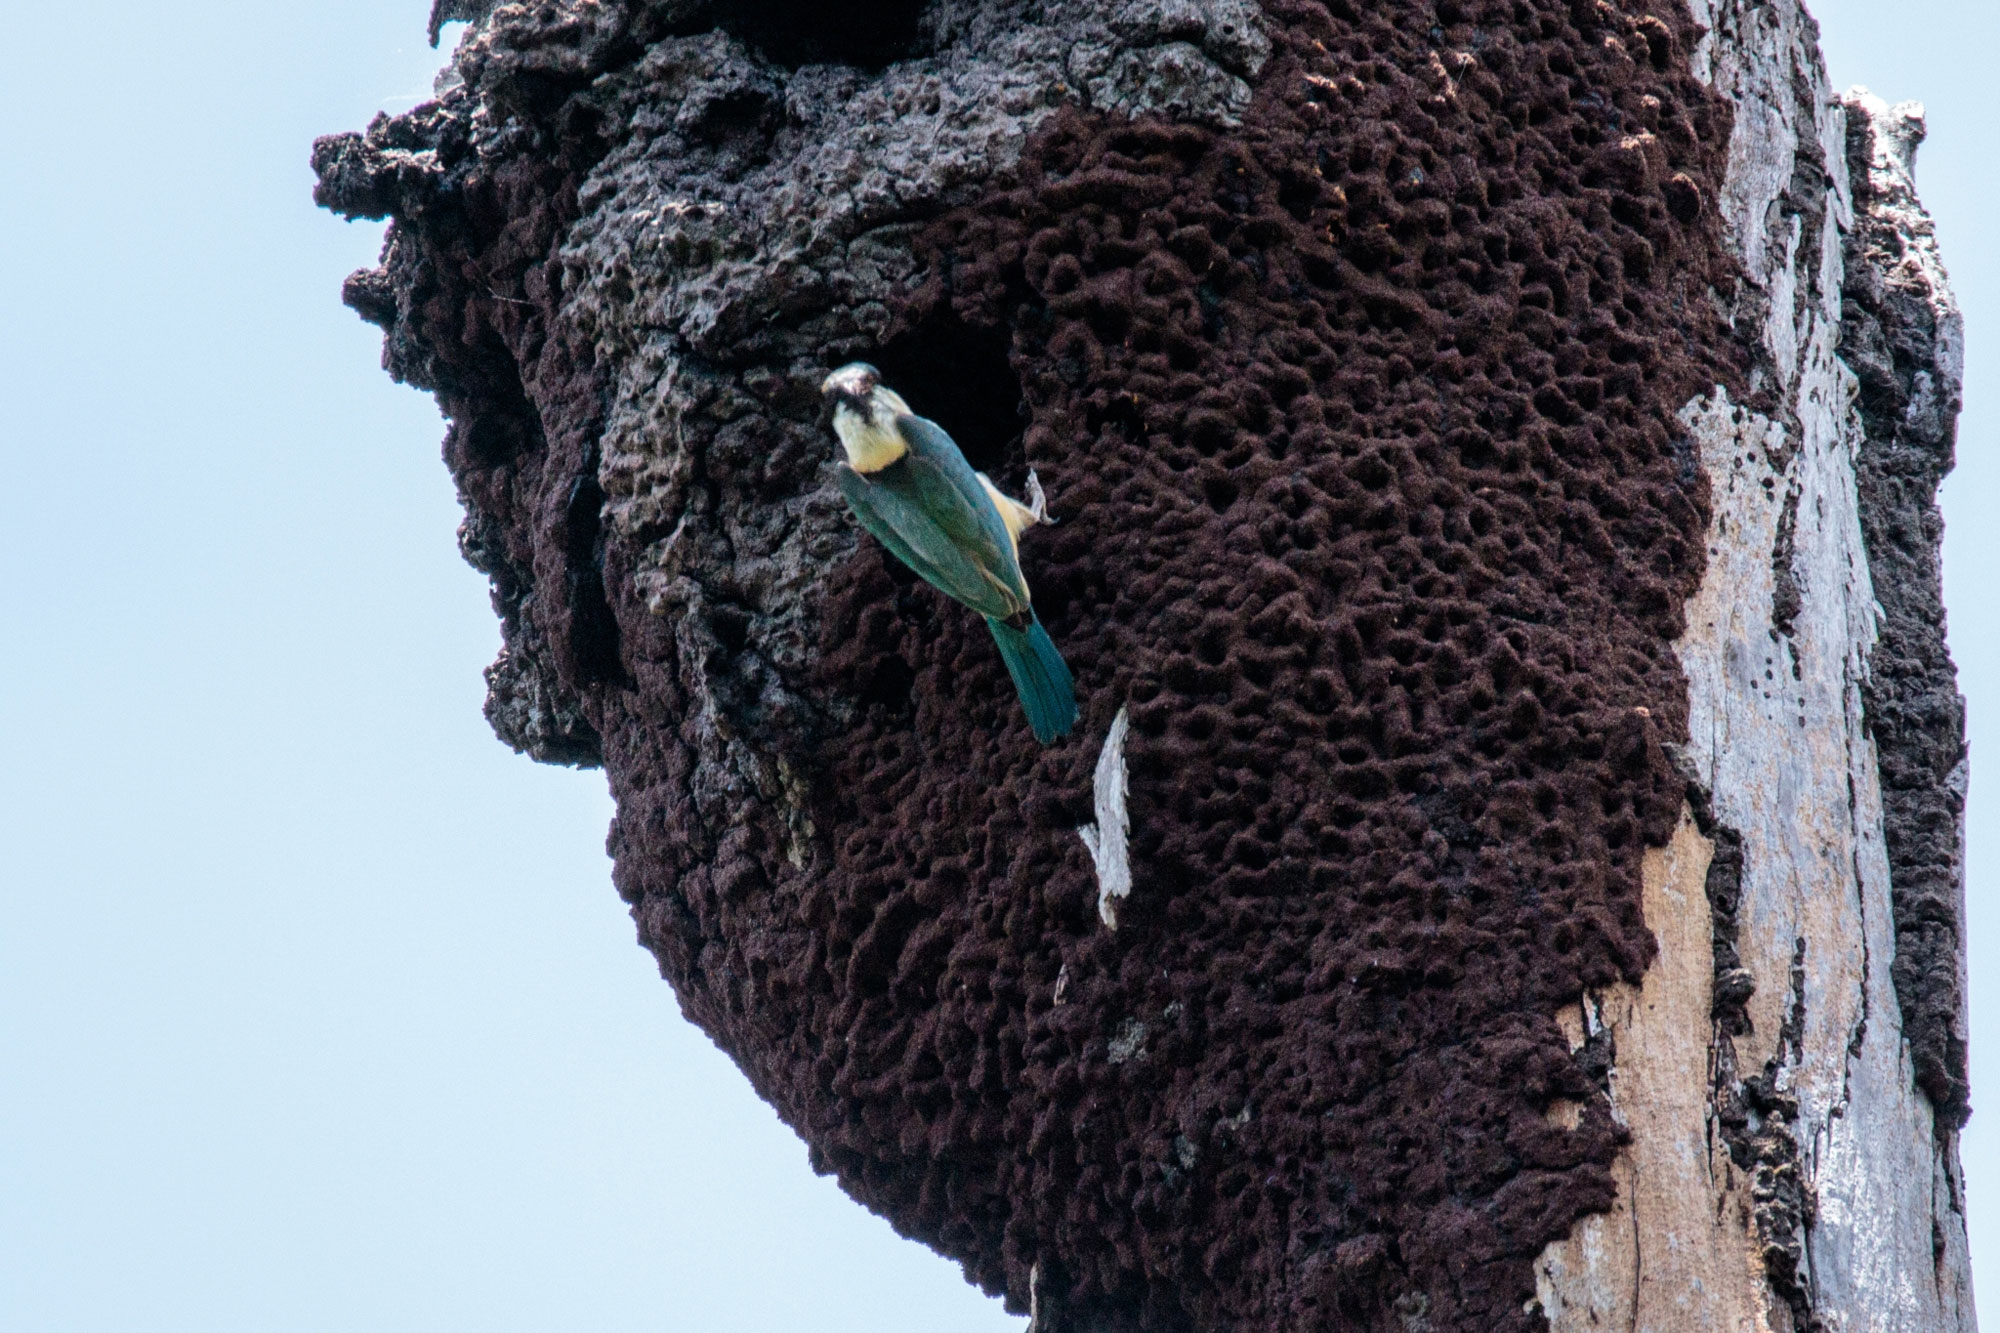 Photograph of a sacred kingfisher perched on the side of a termite nest in a tree. The bird is clinging to the edge of a large hole in the nest, which is the bird's nest. The bird is blue, white, and black.